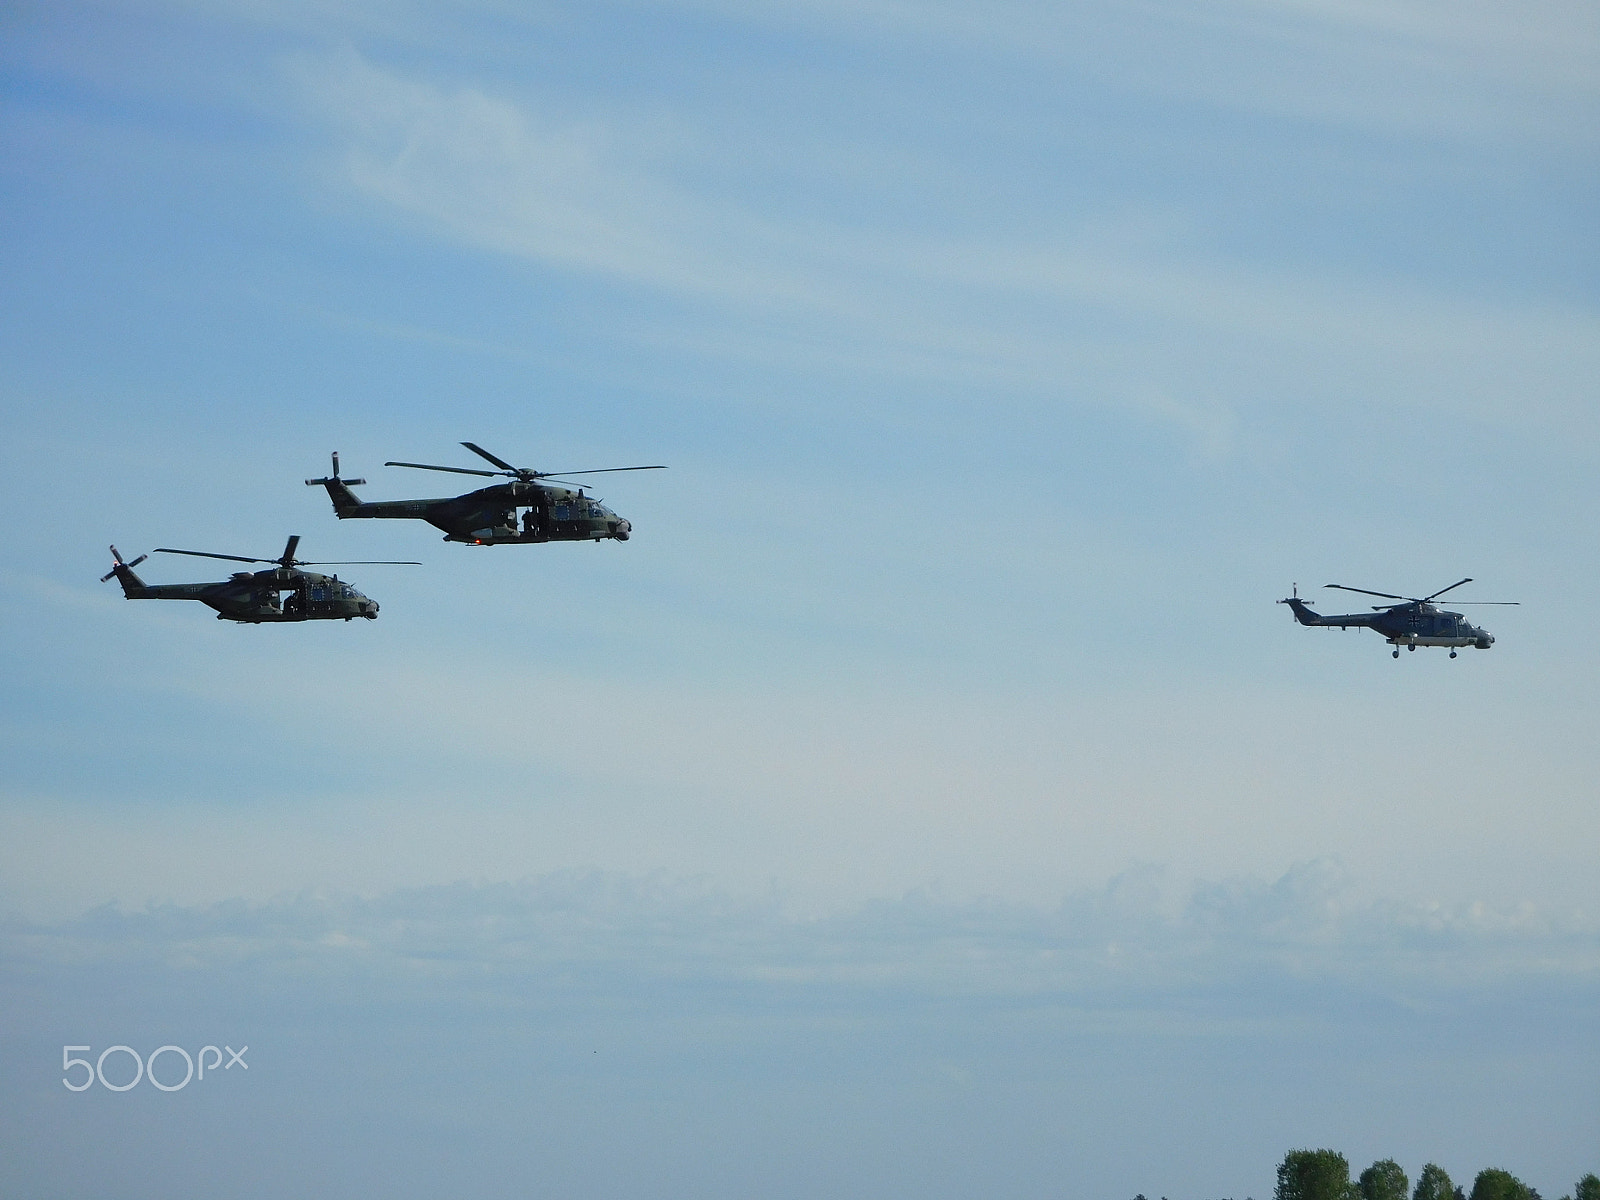 Nikon Coolpix S7000 sample photo. Helicopter formation photography